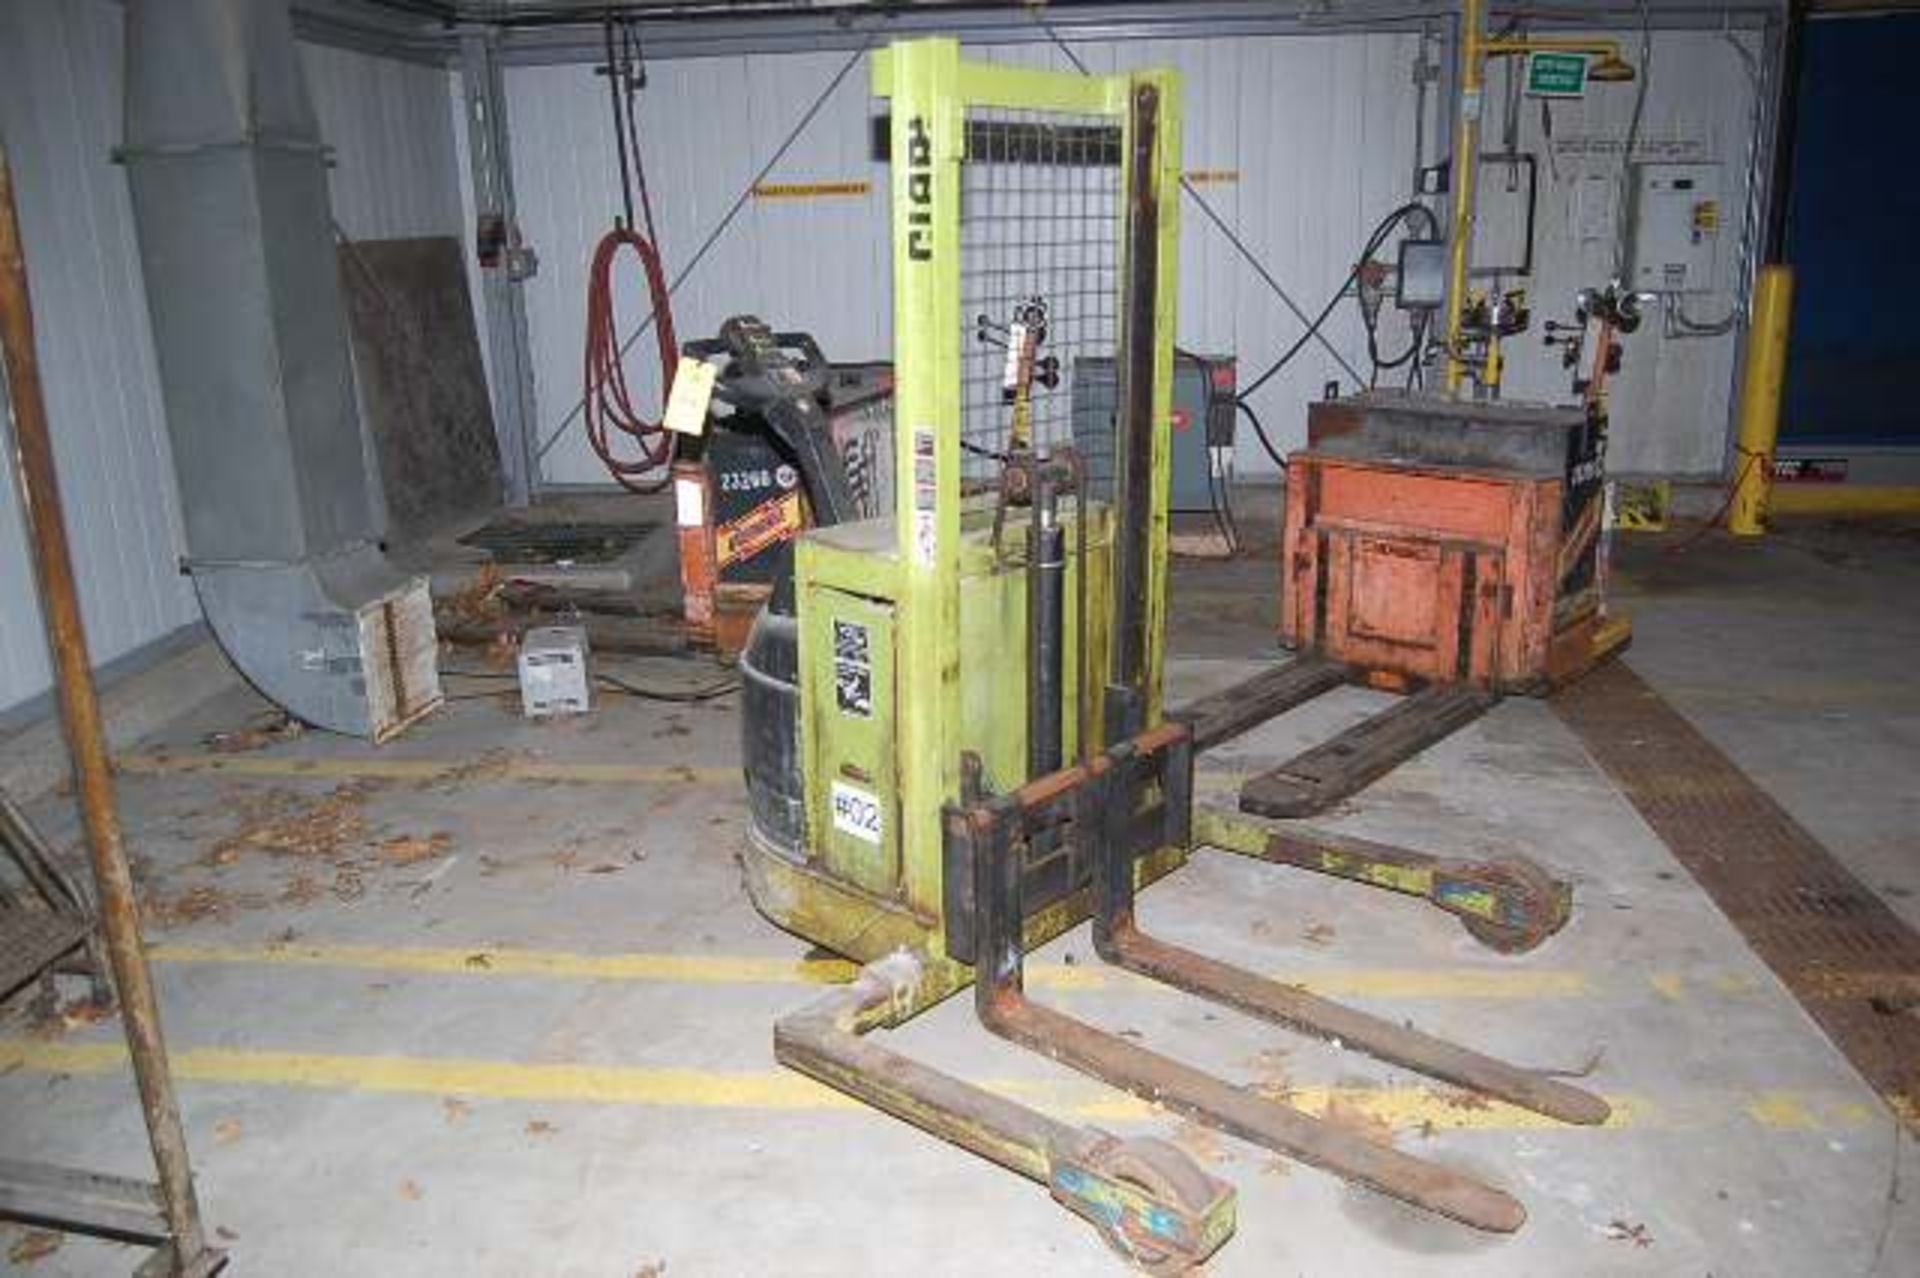 Clark Electric Walk Behind Straddle Lift